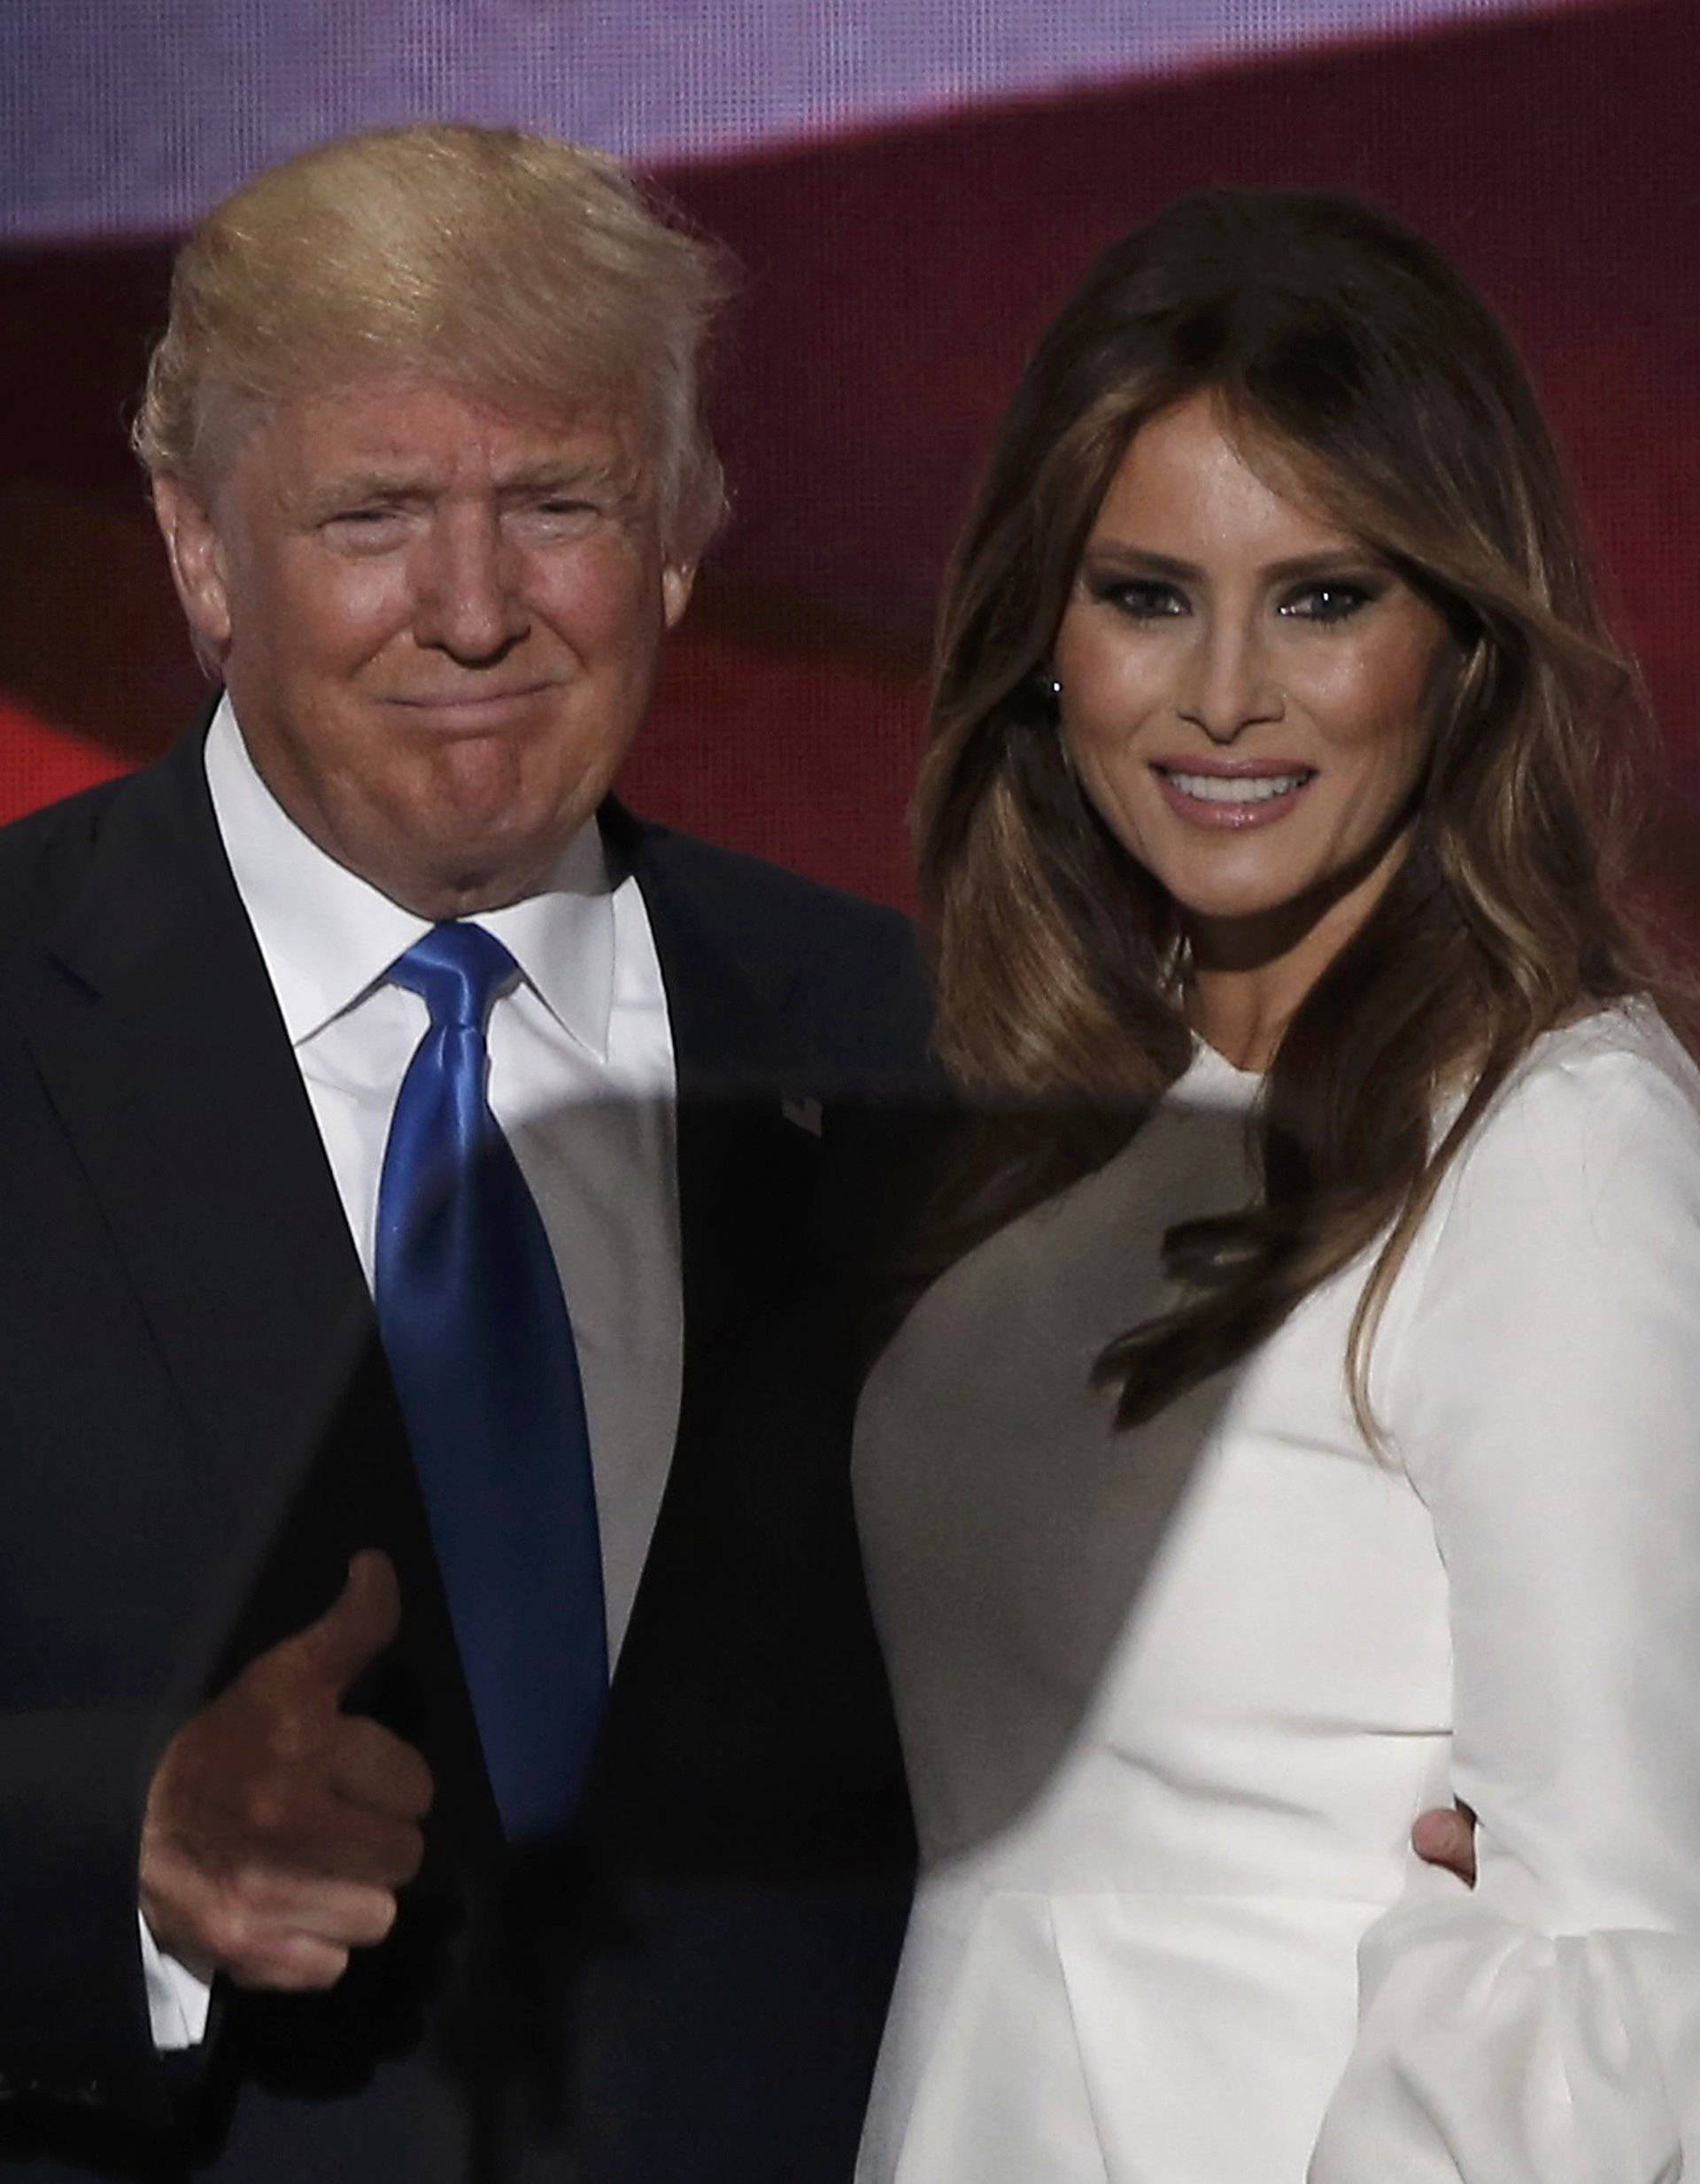 Republican U.S. presidential candidate Donald Trump gives a thumbs up with his wife Melania after she concluded her remarks at the Republican National Convention in Cleveland